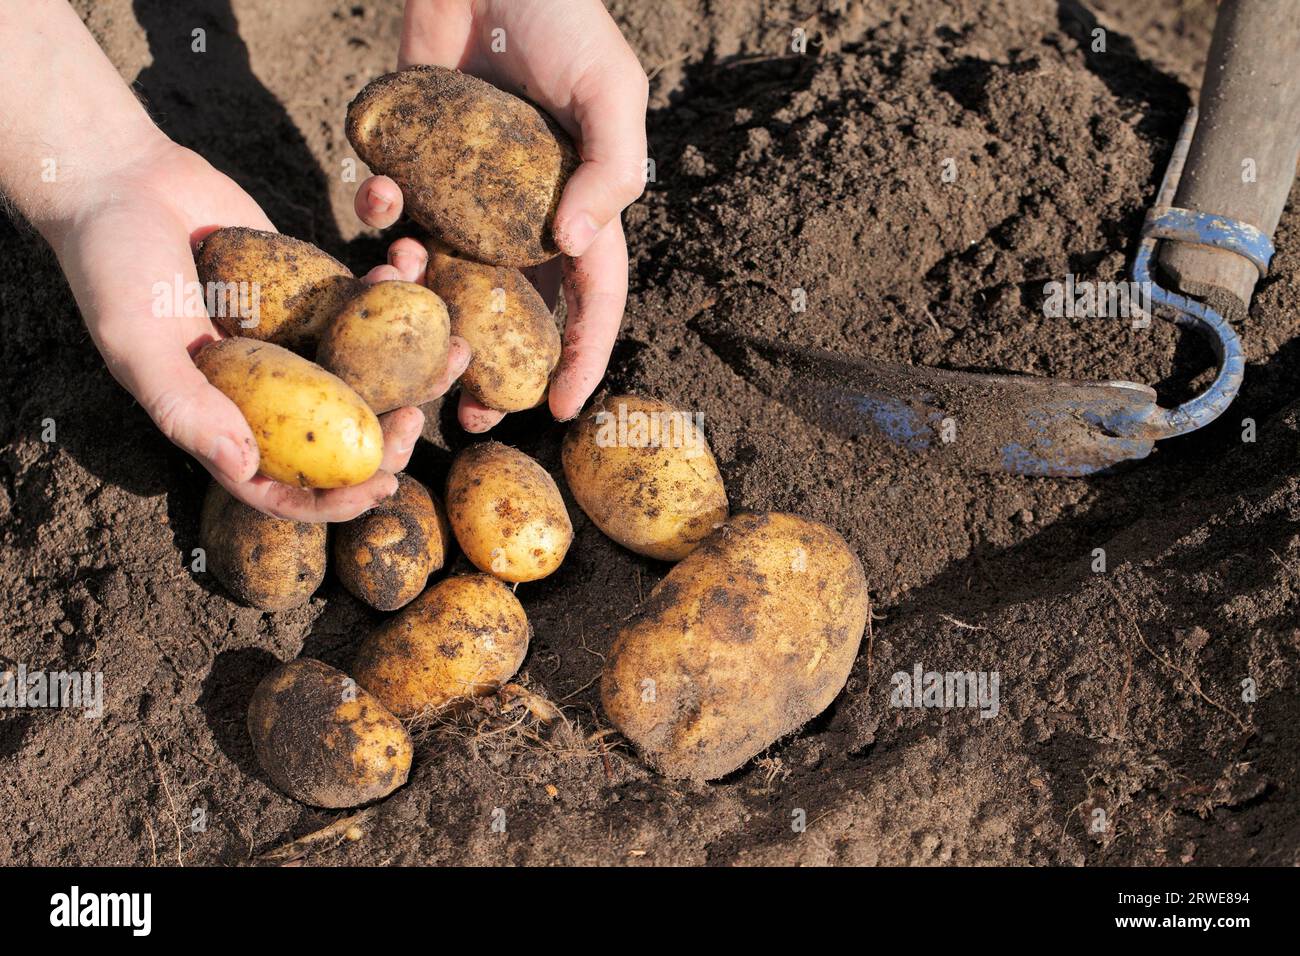 Farmer holding dirty potatoes in his hands Stock Photo